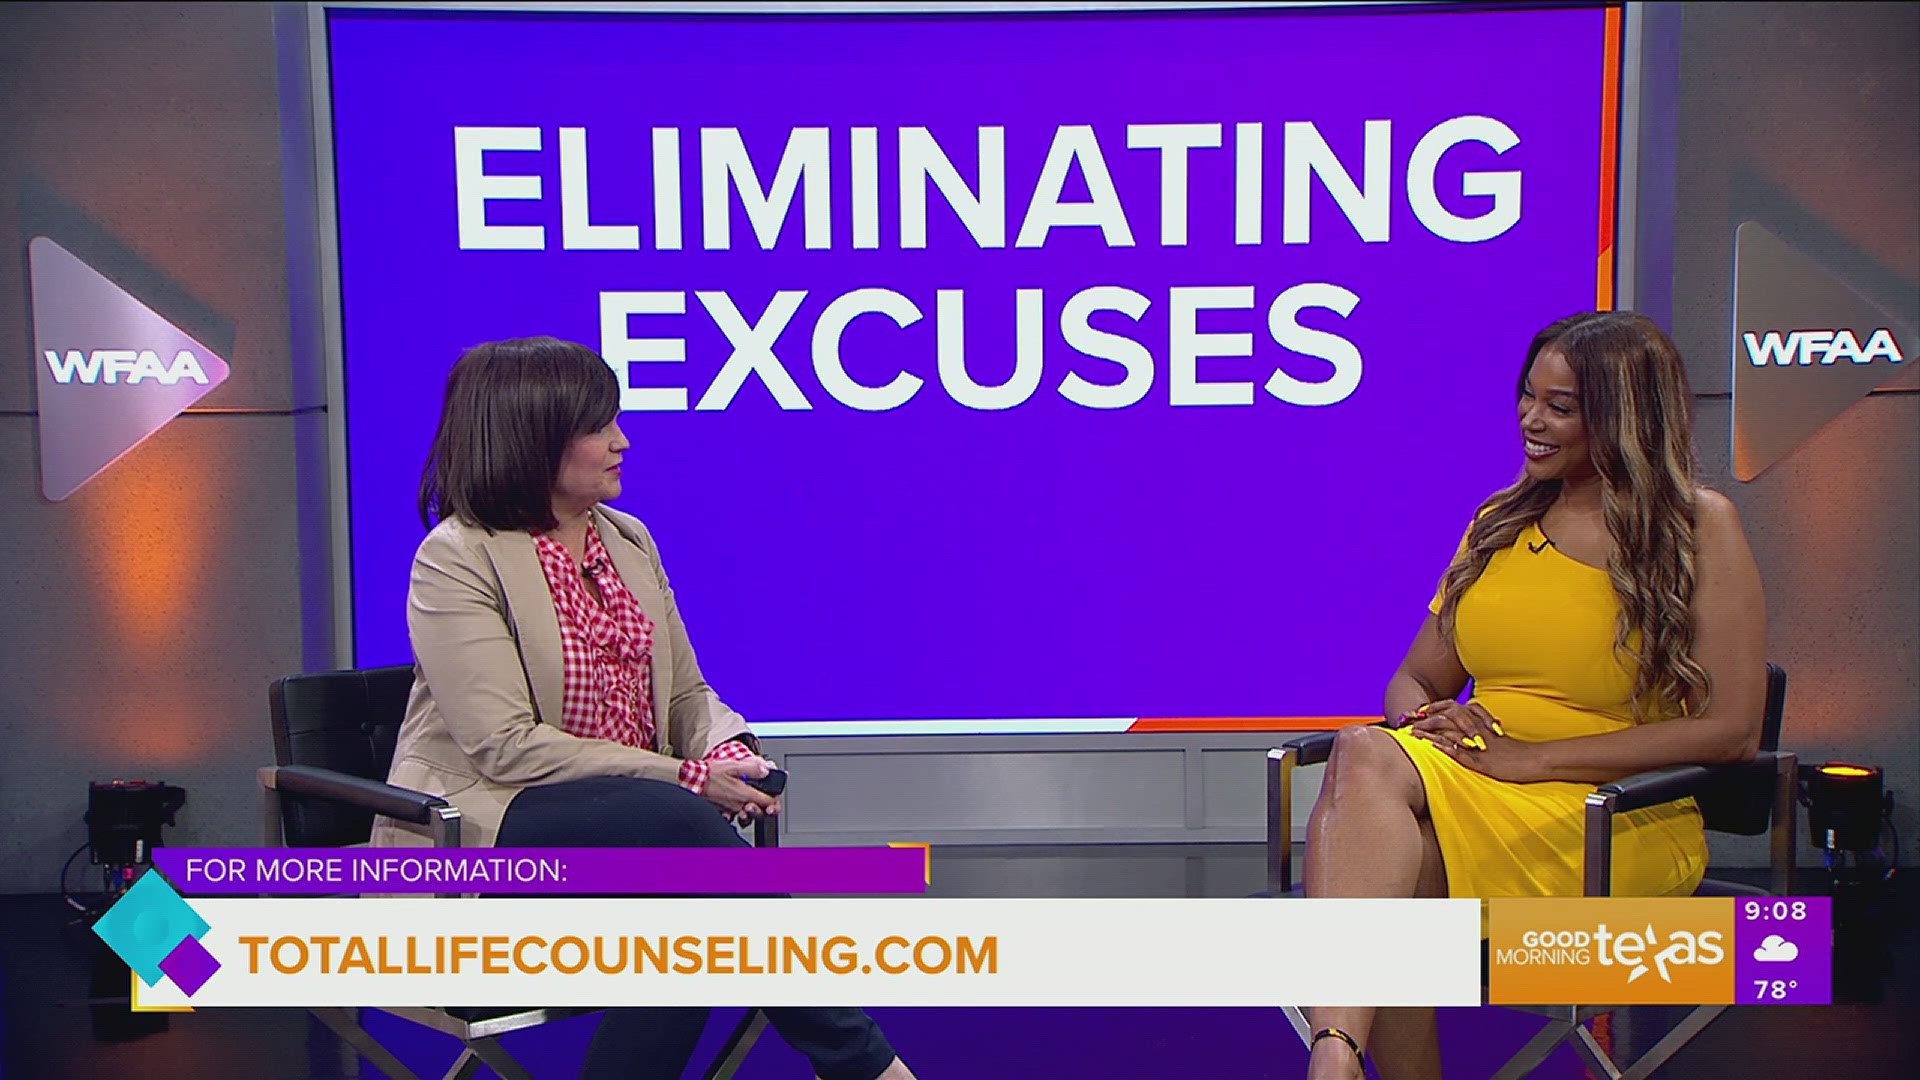 Dr. Jada Jackson shares how you can eliminate excuses. Go to totallifecounseling.com/counseling-services-dallas-texas for more information.